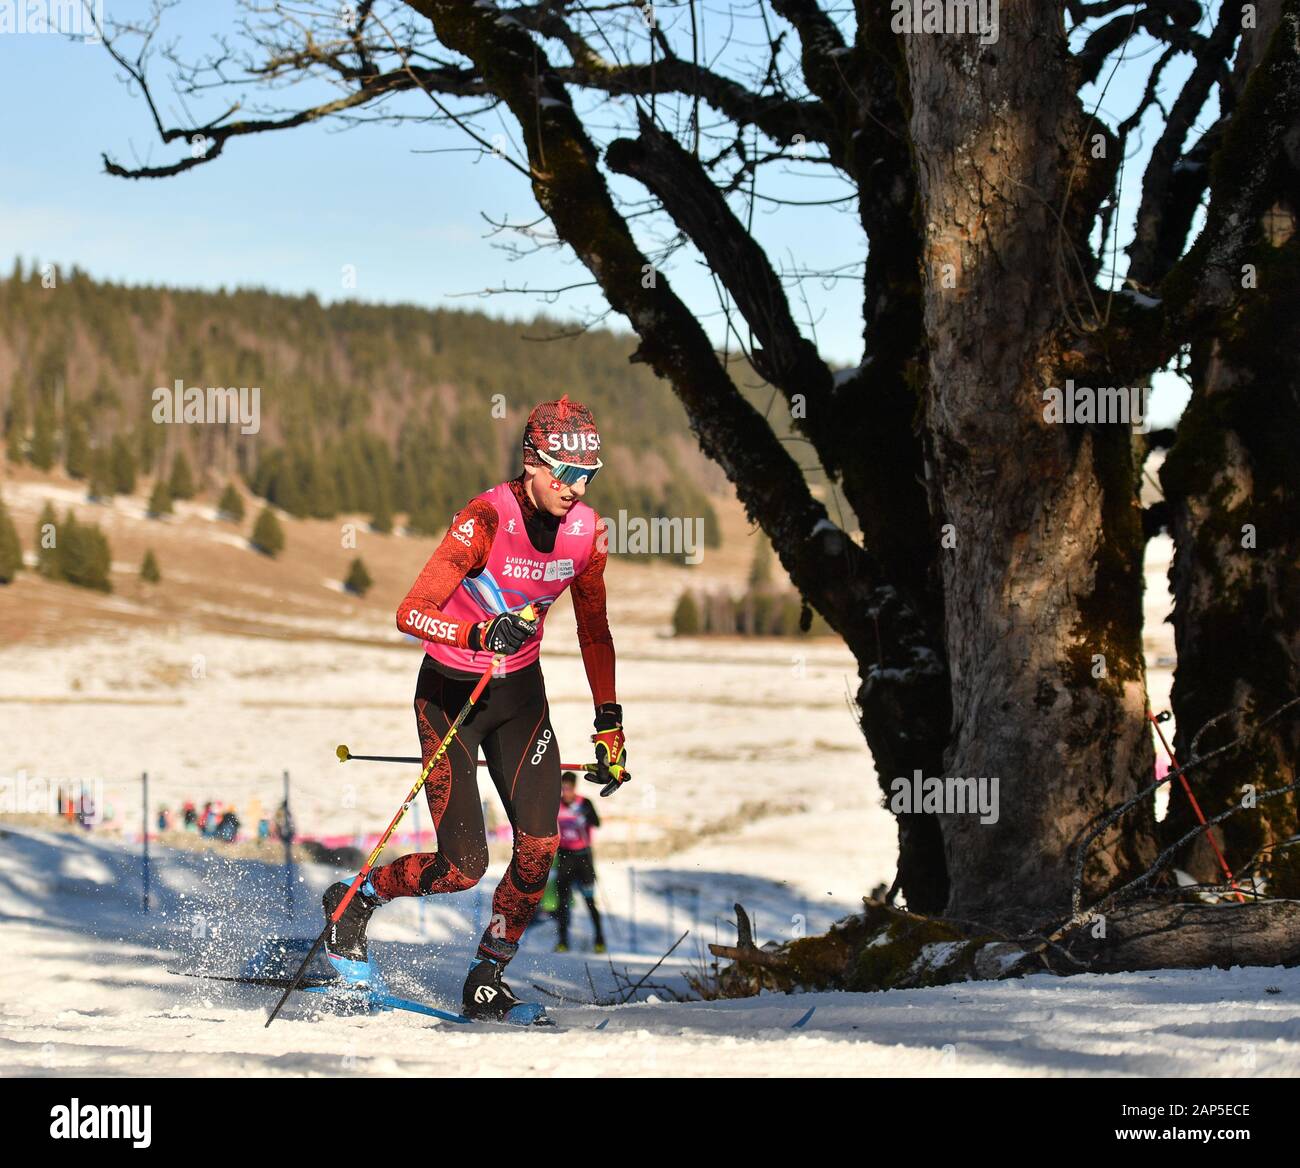 Le Chenit, Switzerland. 21st Jan, 2020. Antonin Savary of Switzerland competes during the men's 10km classic of cross-country skiing event at the 3rd Youth Winter Olympic Games, at Vallee De Joux Cross-Country Centre, Switzerland, on Jan. 21, 2020. Credit: Wu Huiwo/Xinhua/Alamy Live News Stock Photo